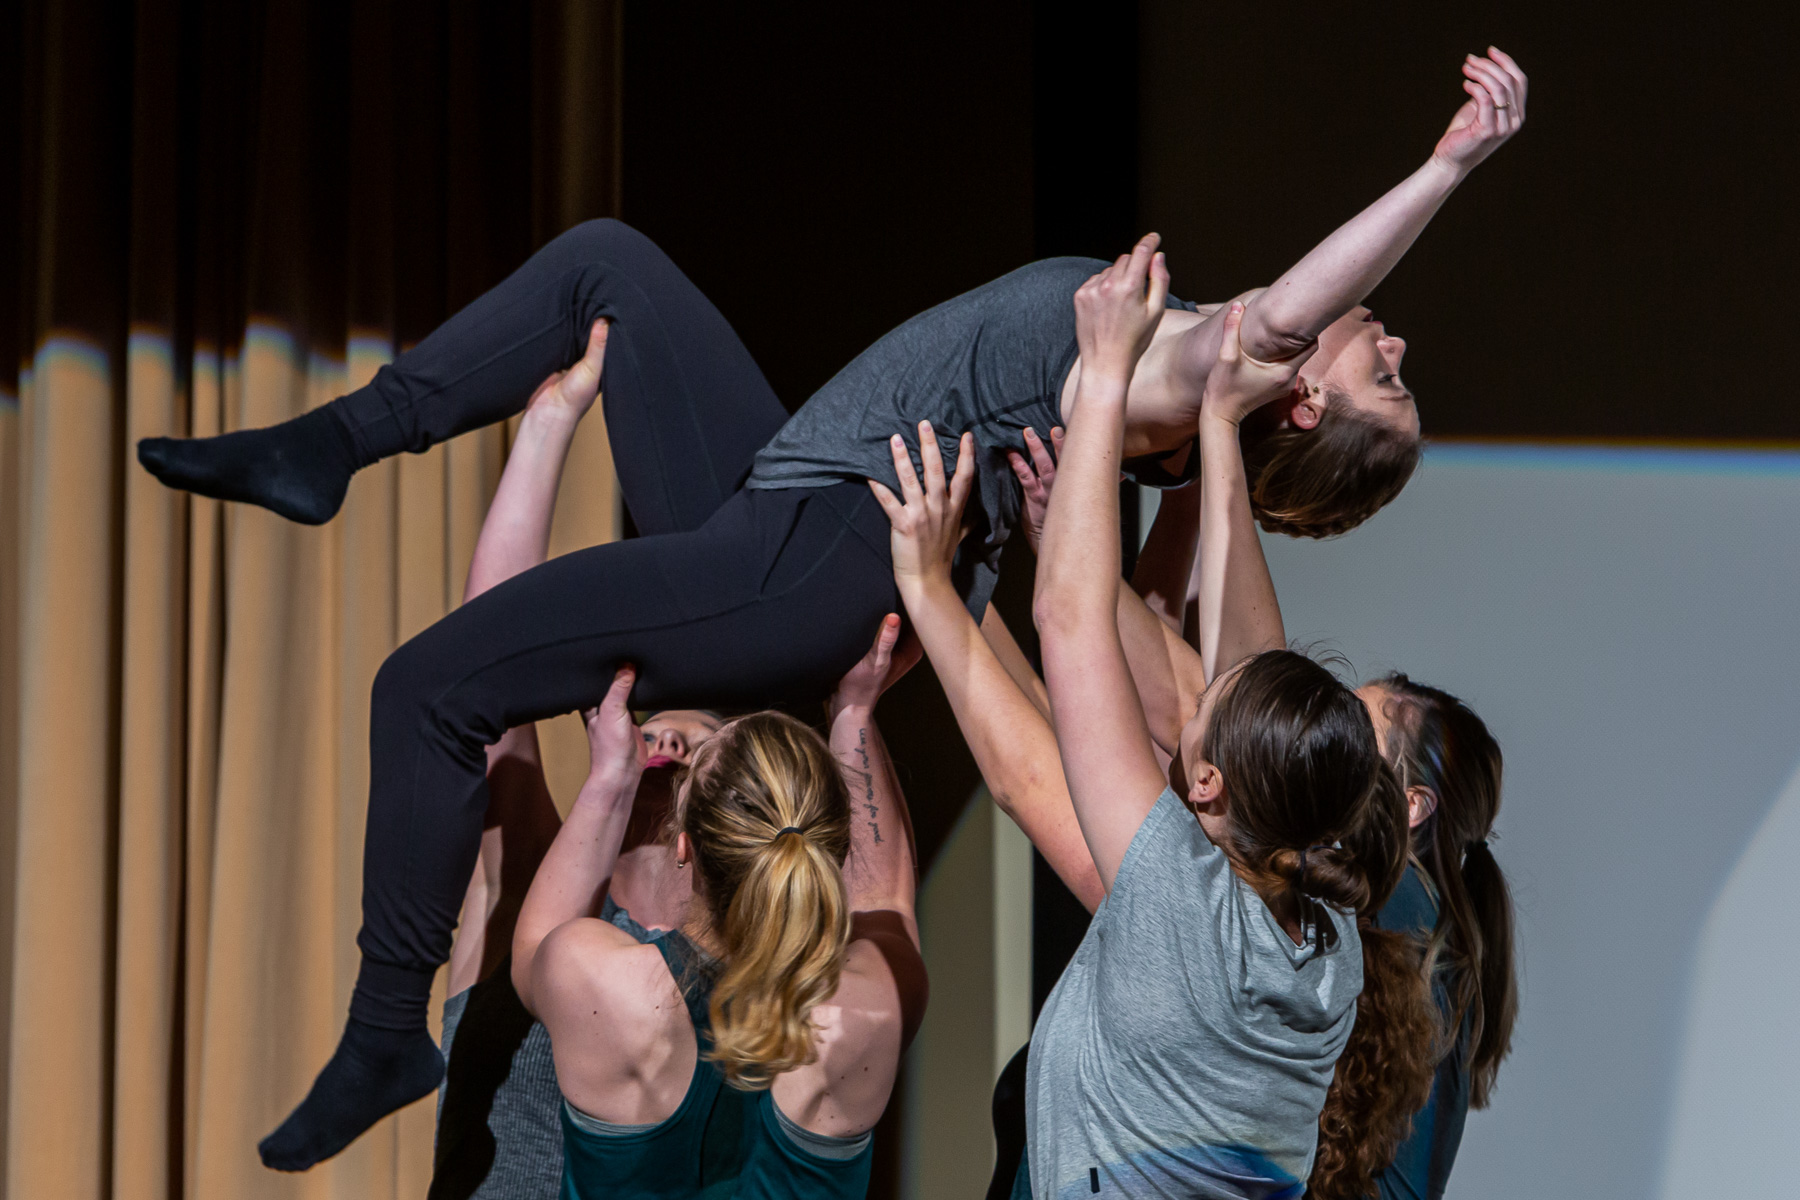 Members of the Trifecta Dance Collective perform an original piece, telling the story of homelessness through movement. (DePaul University/Randall Spriggs)